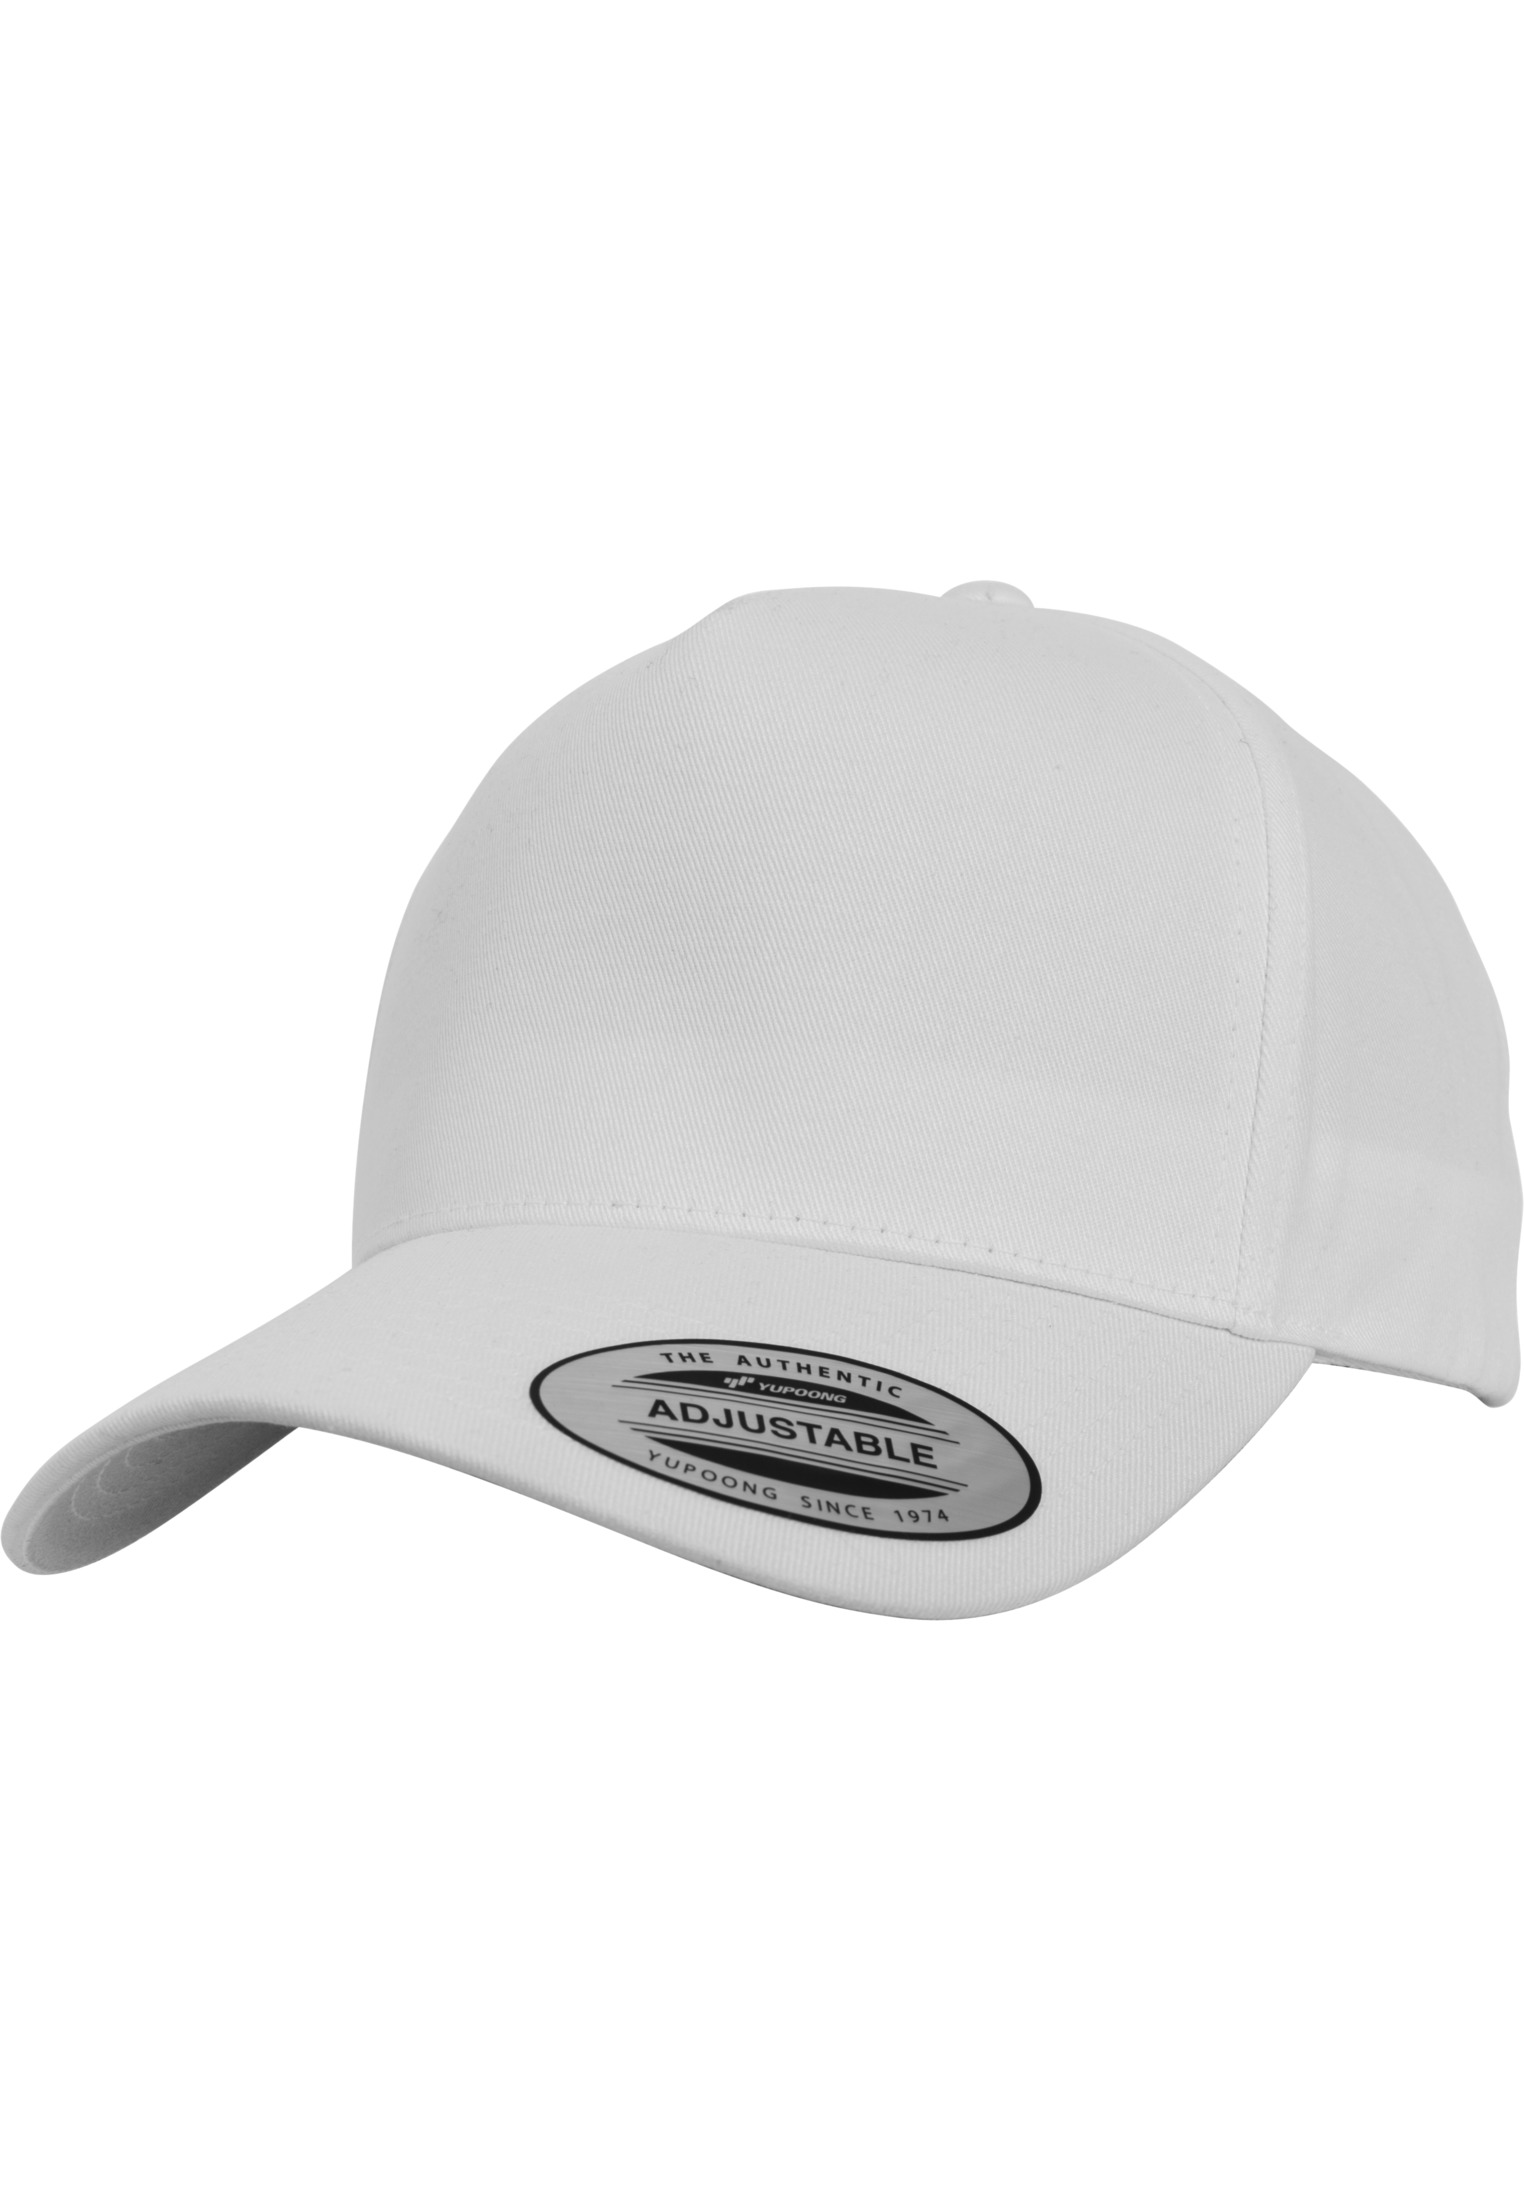 Snapback 5-Panel Curved Classic Snapback in Farbe white